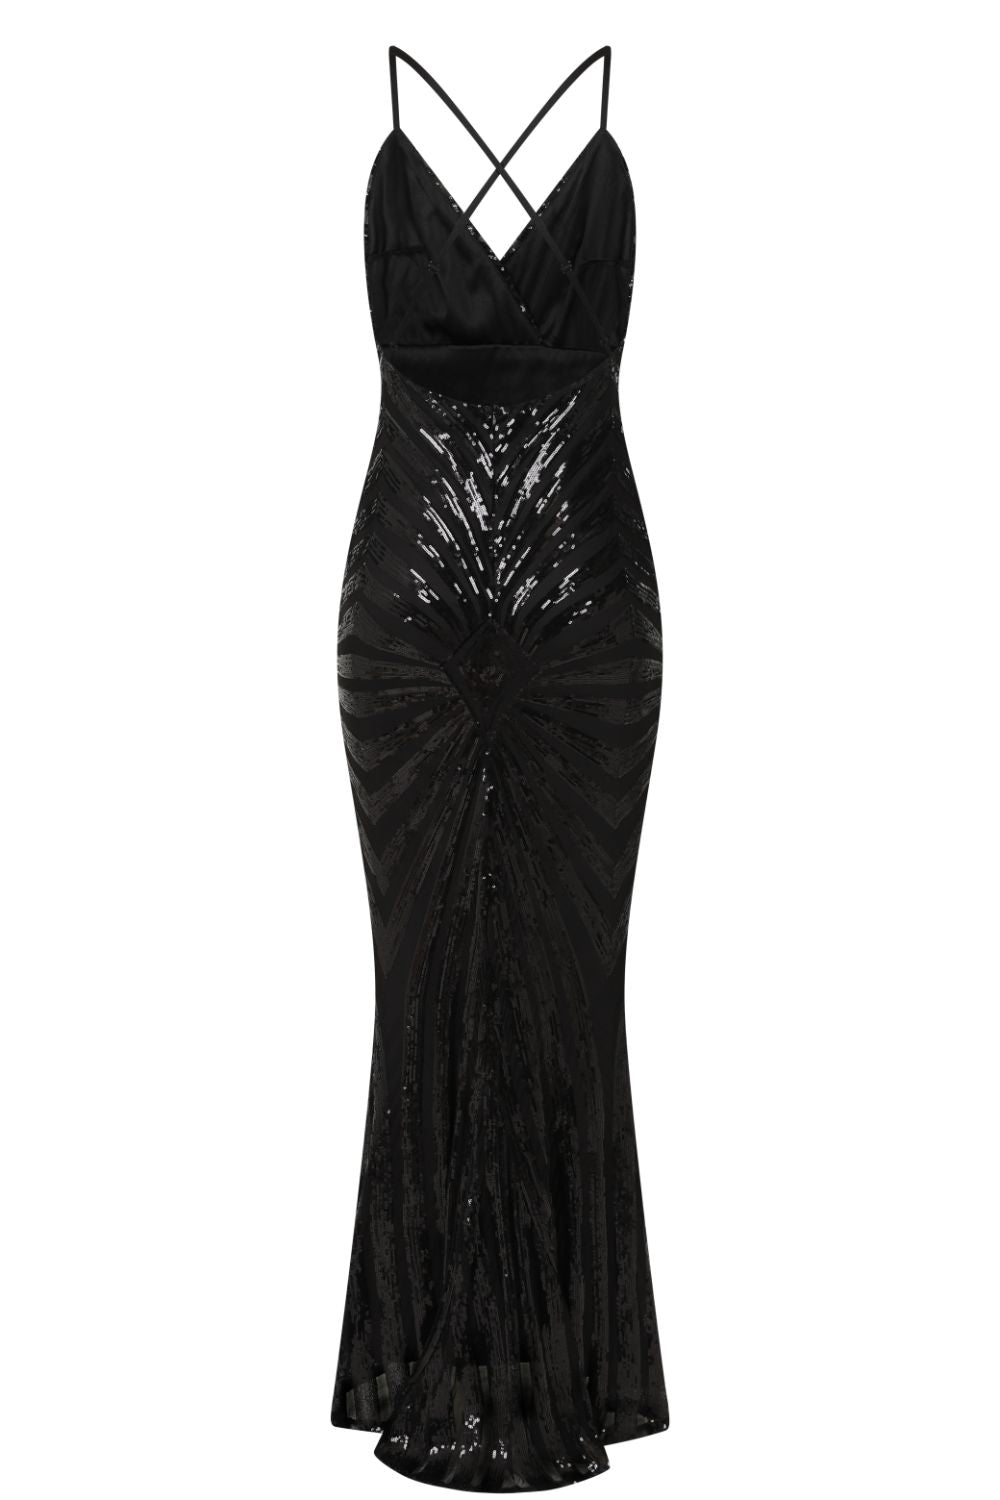 Timeless Black Plunge Sequin Hourglass Illusion Mermaid Maxi Dress